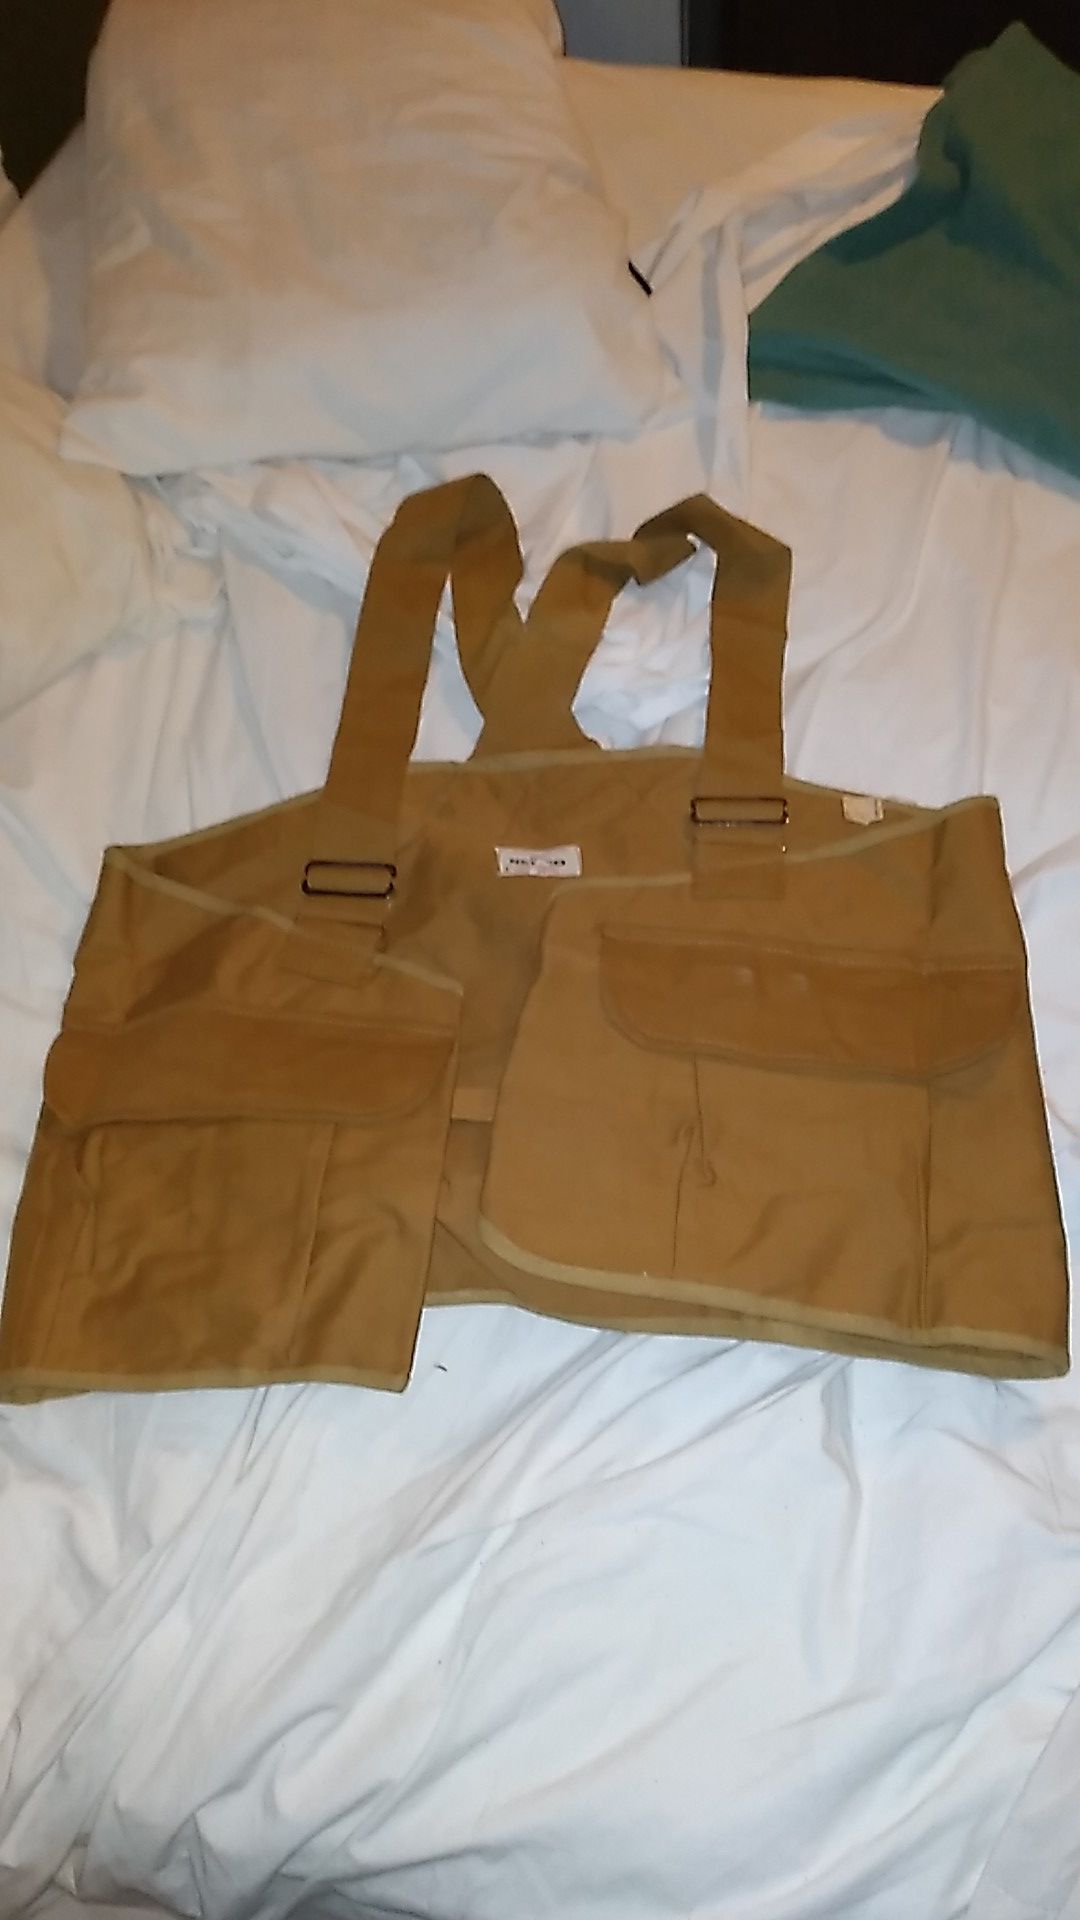 Newco Woodworkers apron